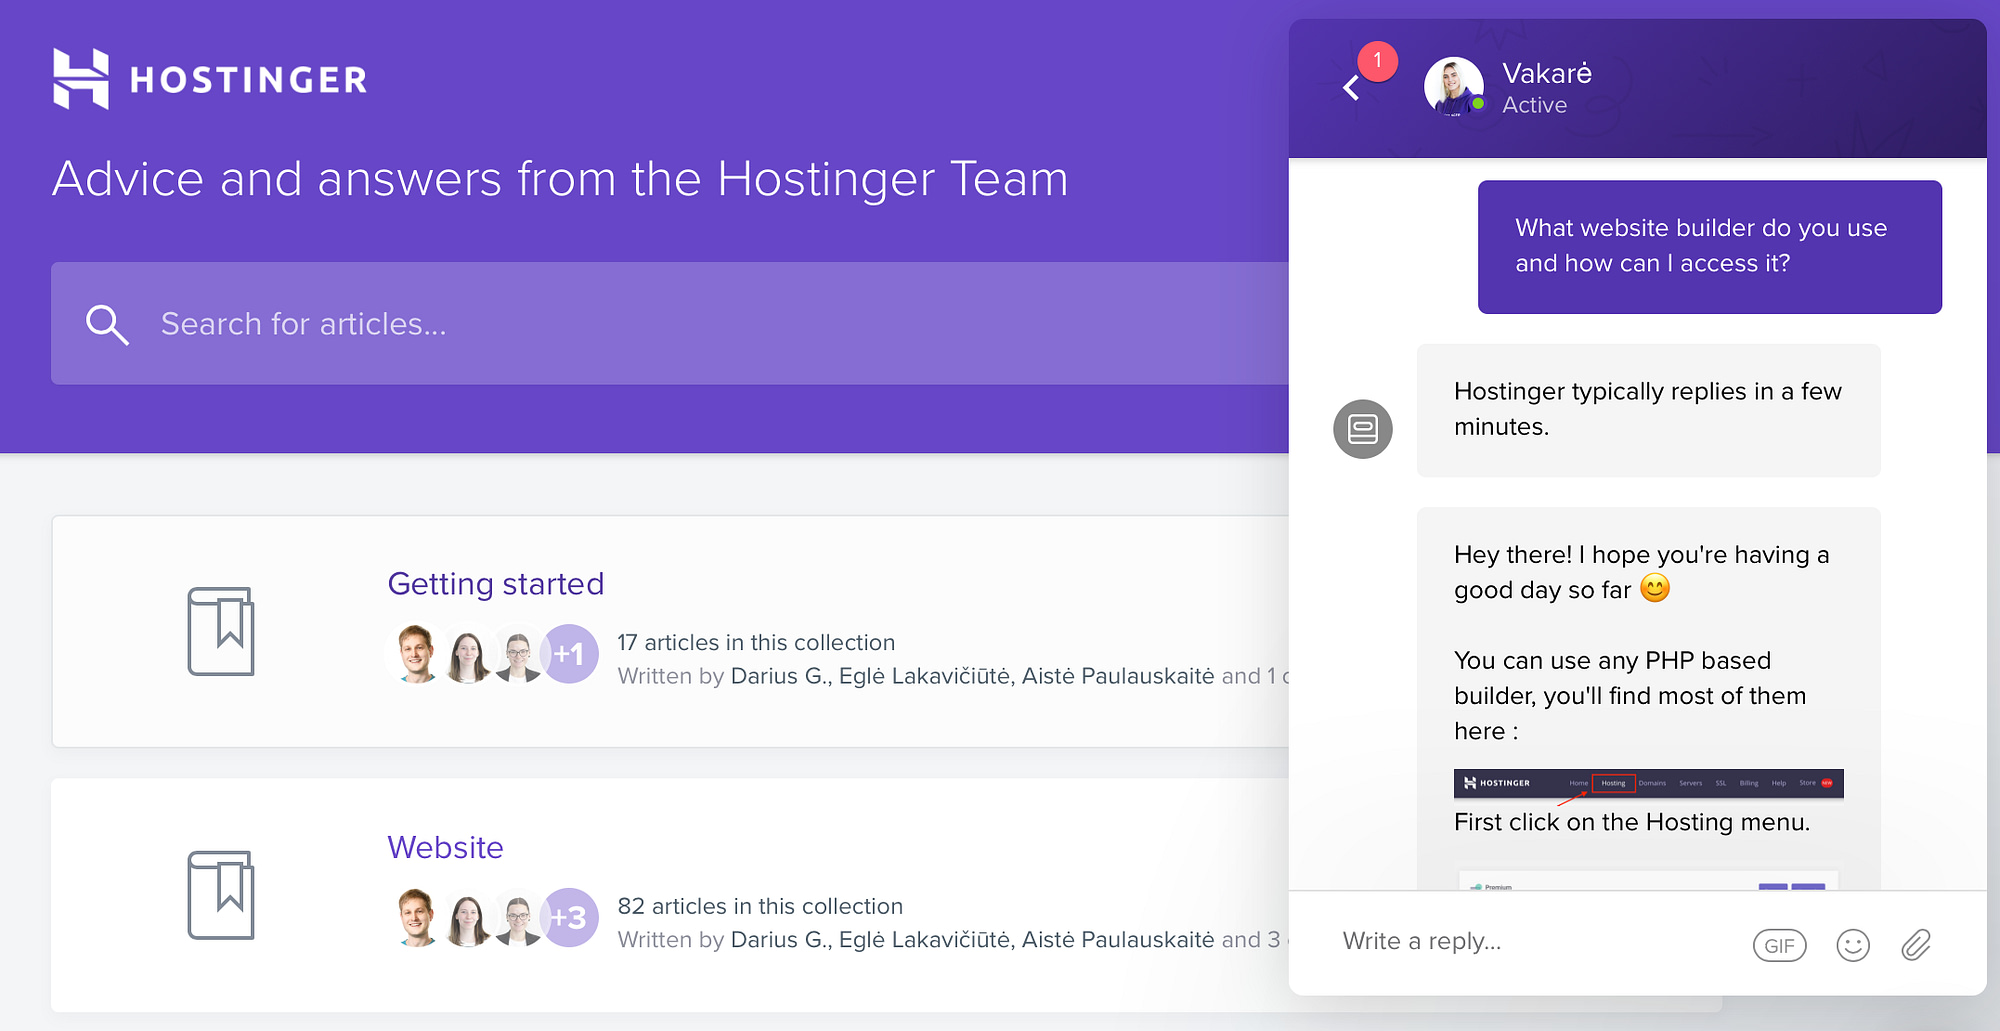 The Hostinger live support chat window.